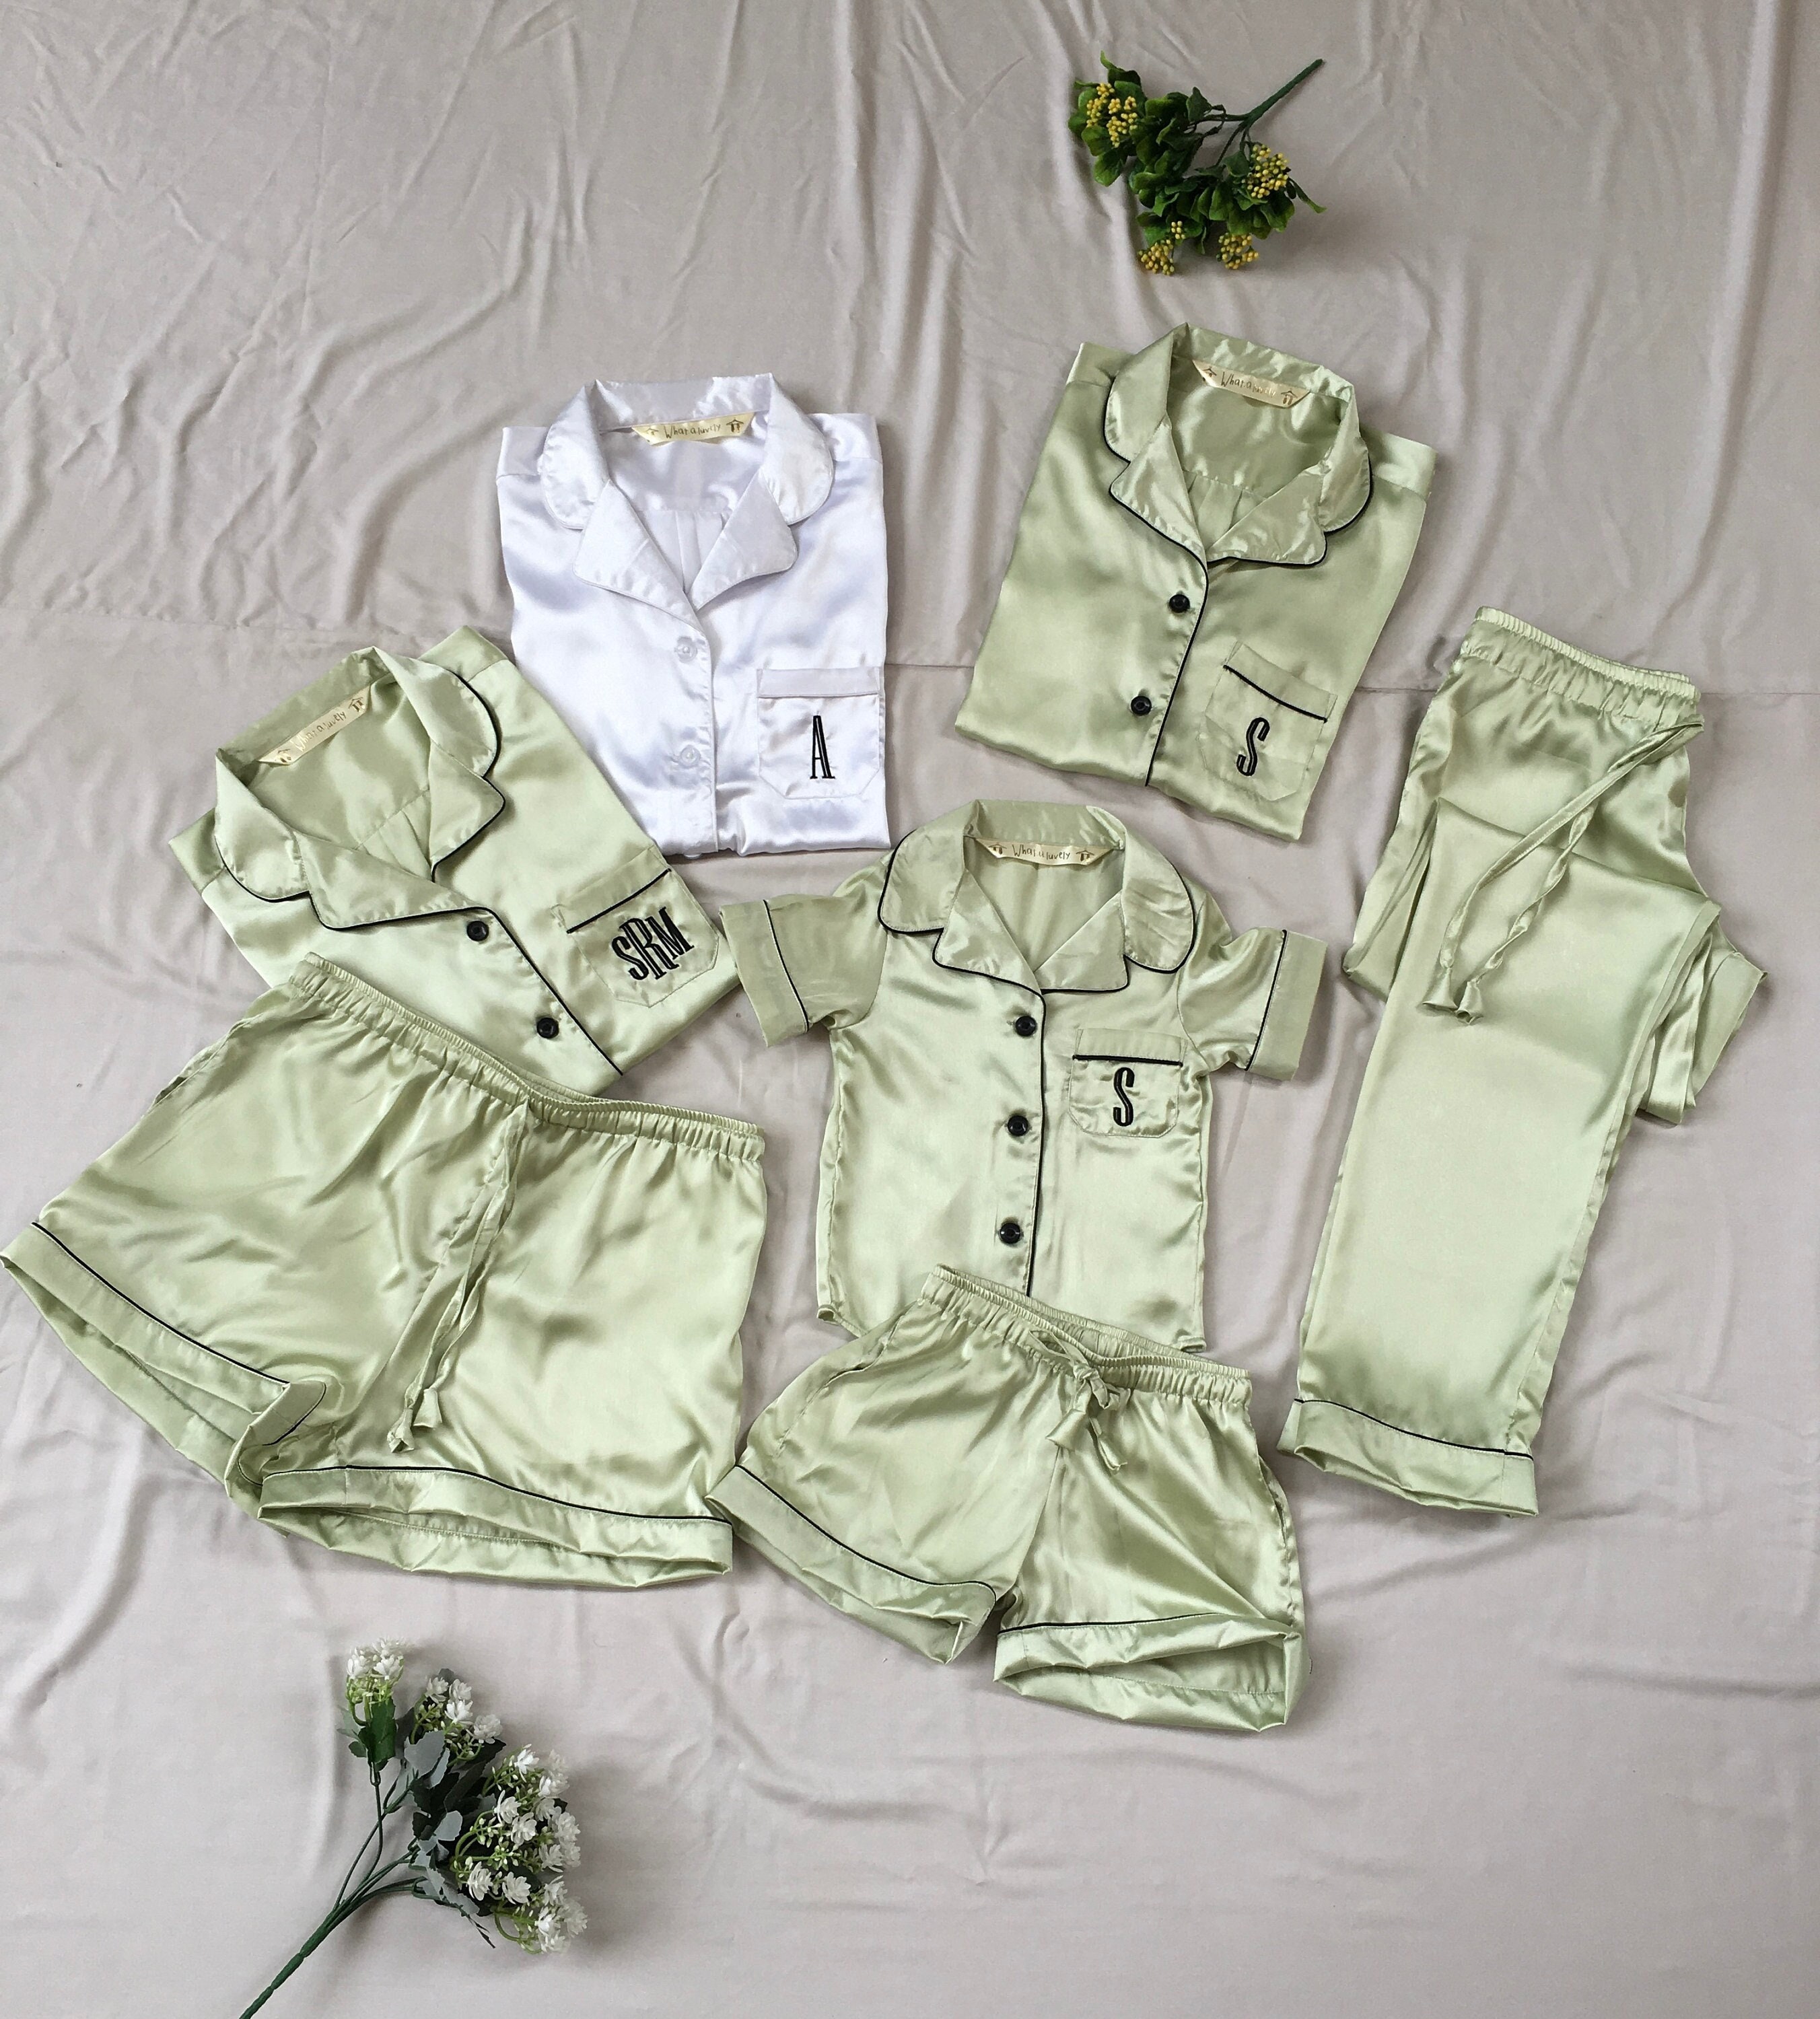 Silky Emerald Green Matching Bridesmaid Pajamas Shirt Short Pant Set for  Bridal Party and Getting Ready . Flower Girl Pj Set Available Too. 